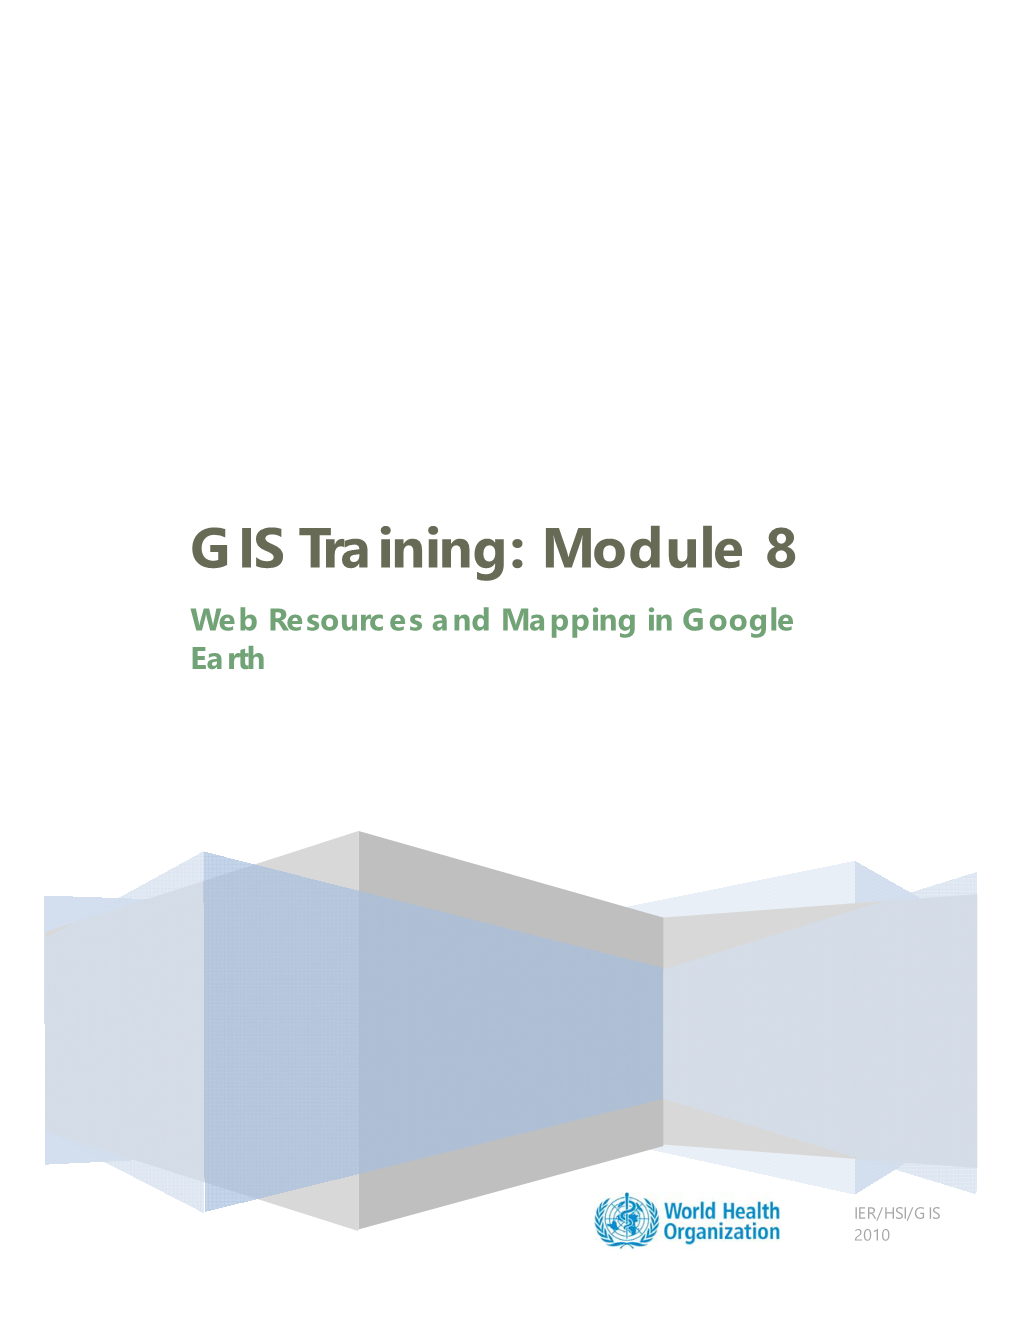 GIS Training: Module 8 Web Resources and Mapping in Google Earth